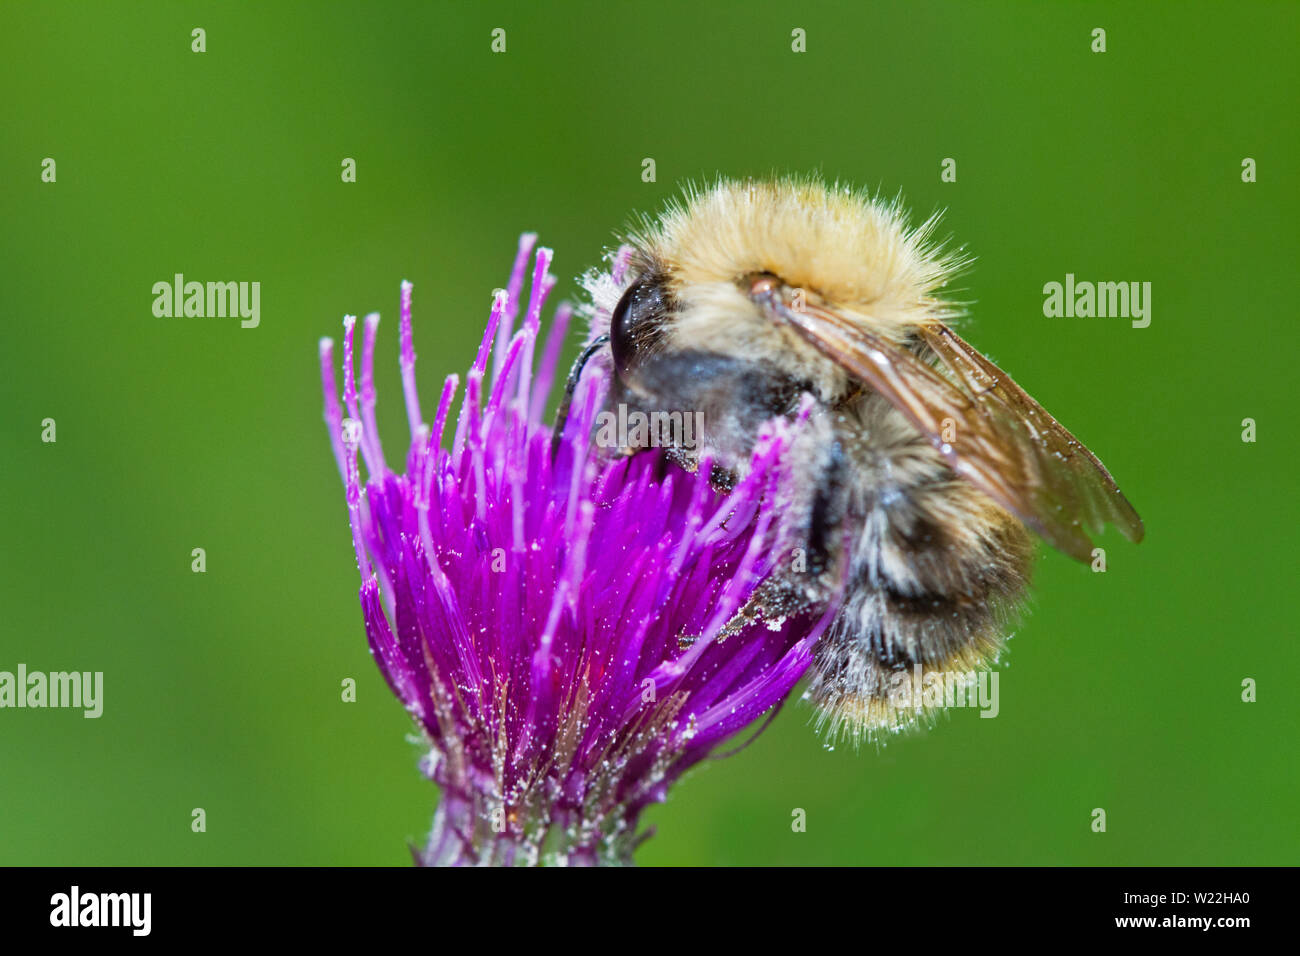 Pollination, a Tree bumblebee on the purple flower of a Marsh thistle Stock Photo